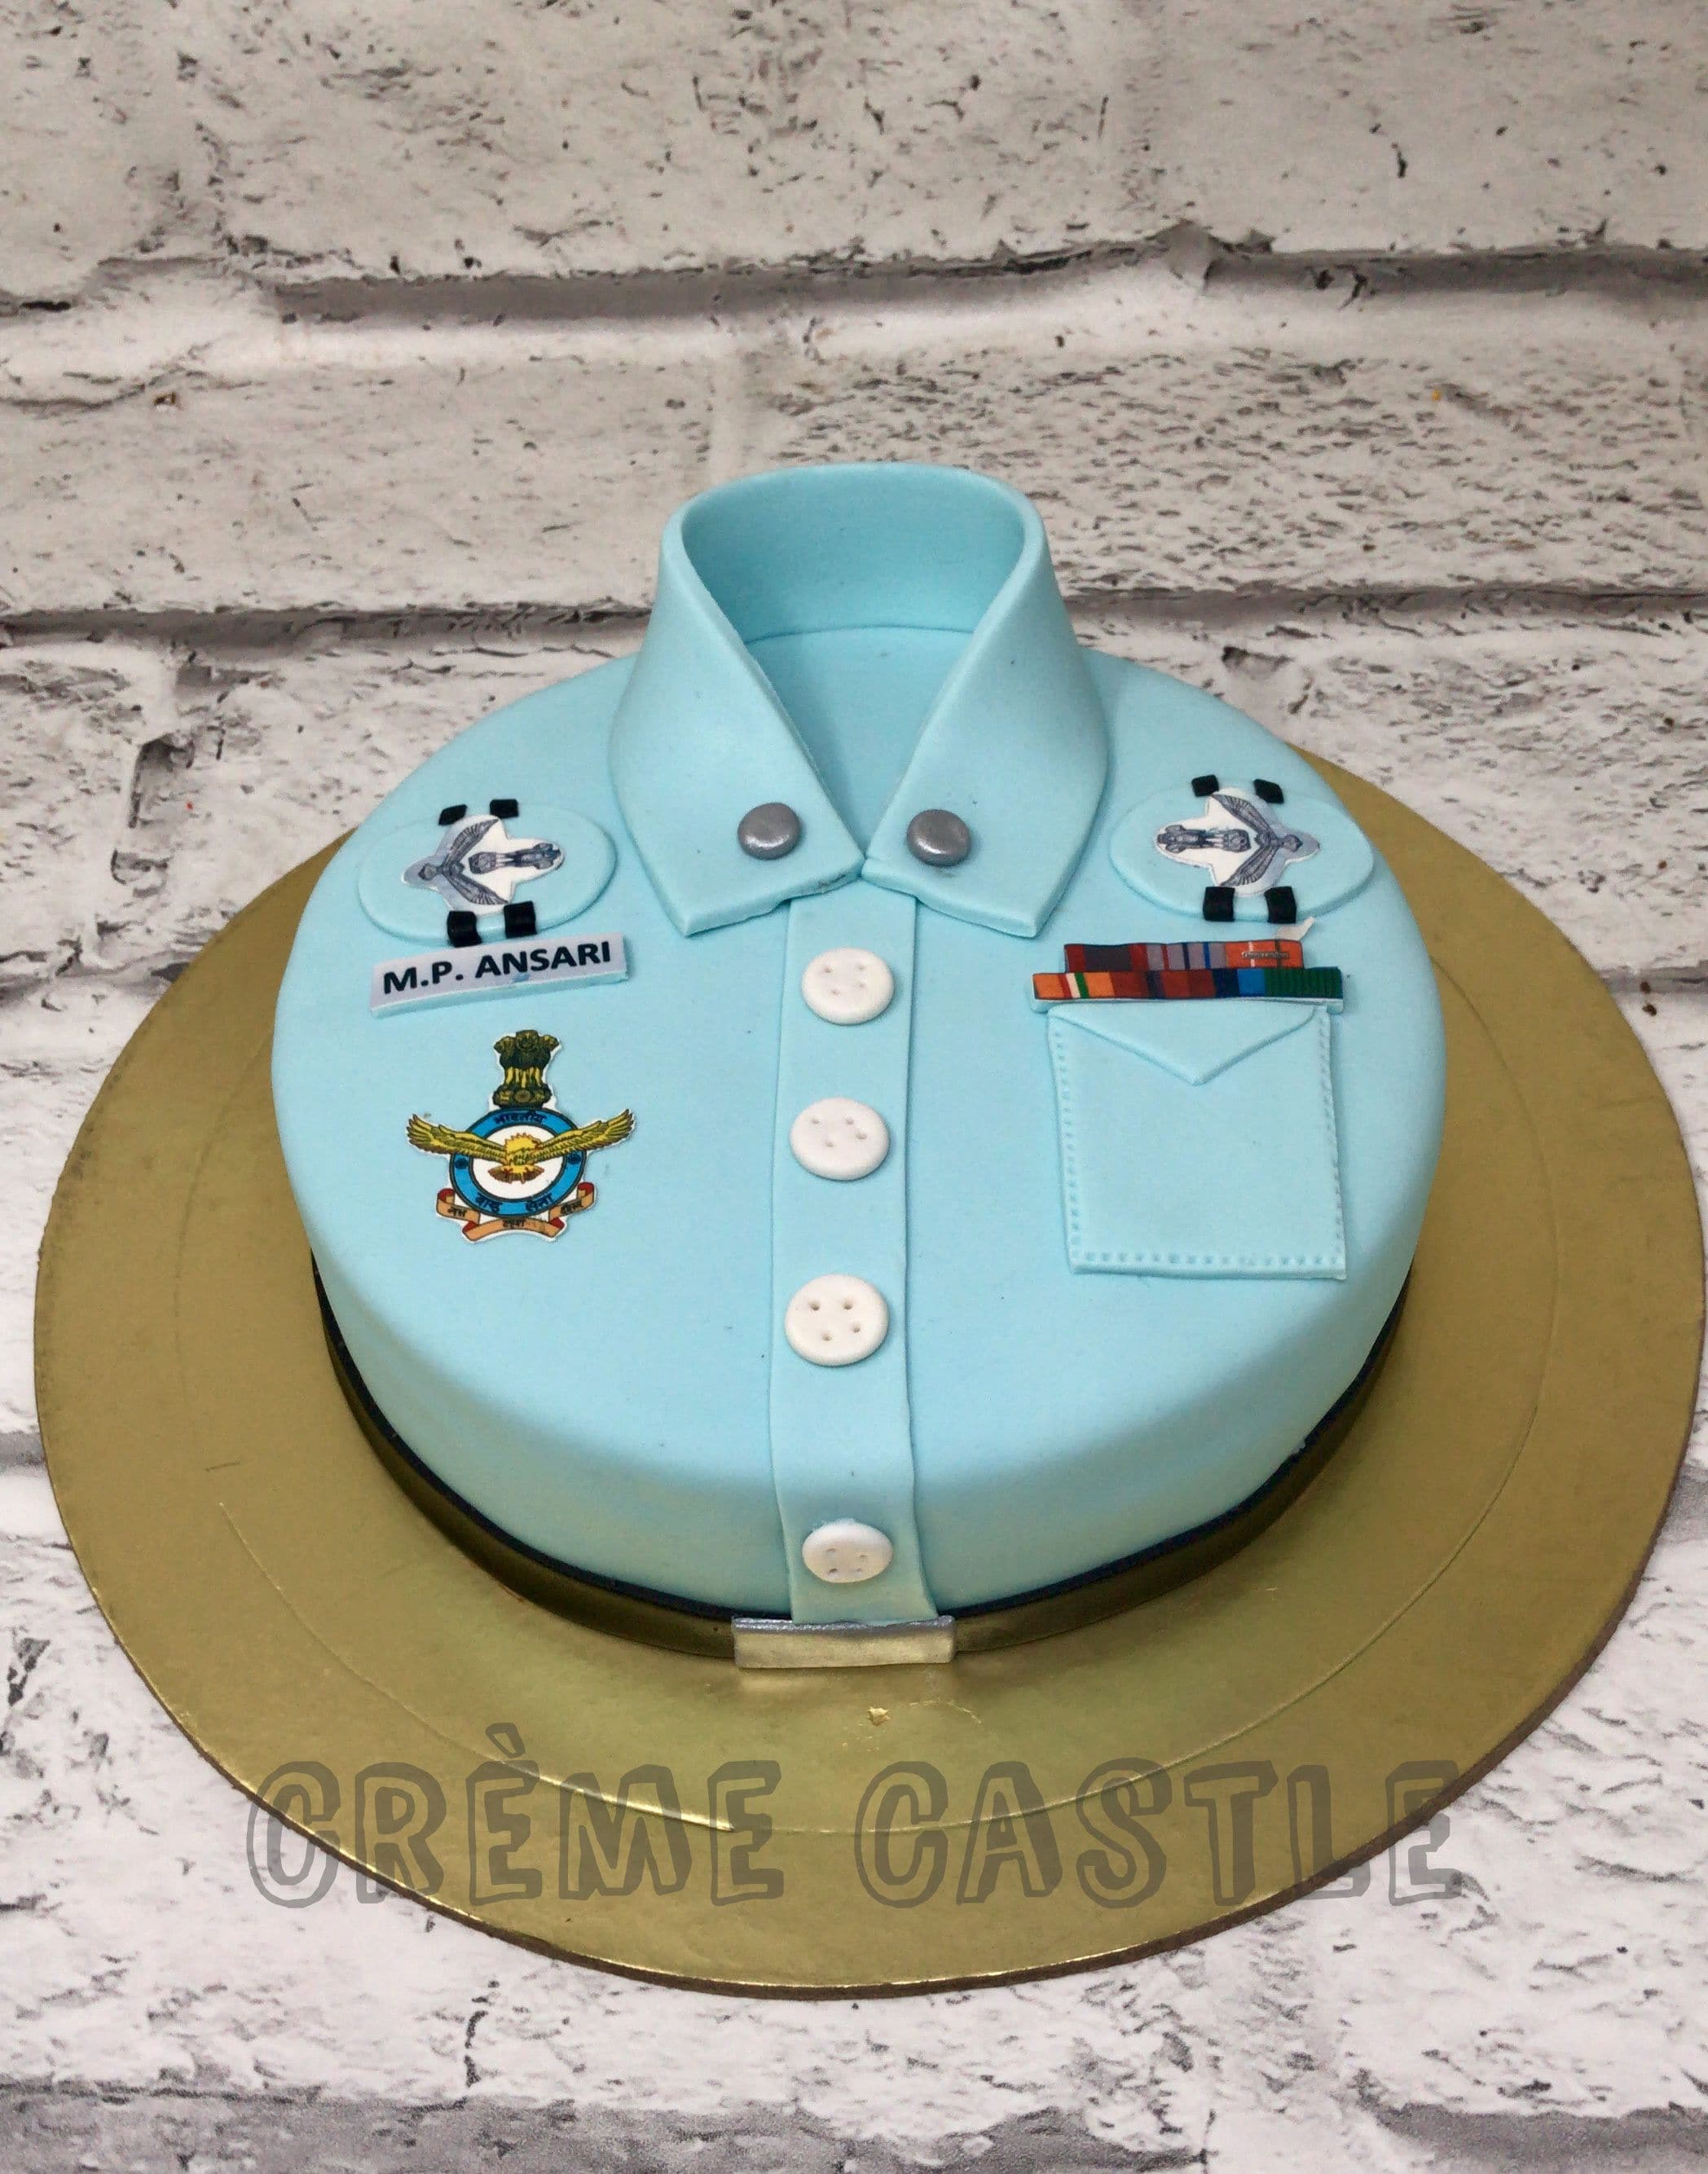 Us Air Force Cake - CakeCentral.com